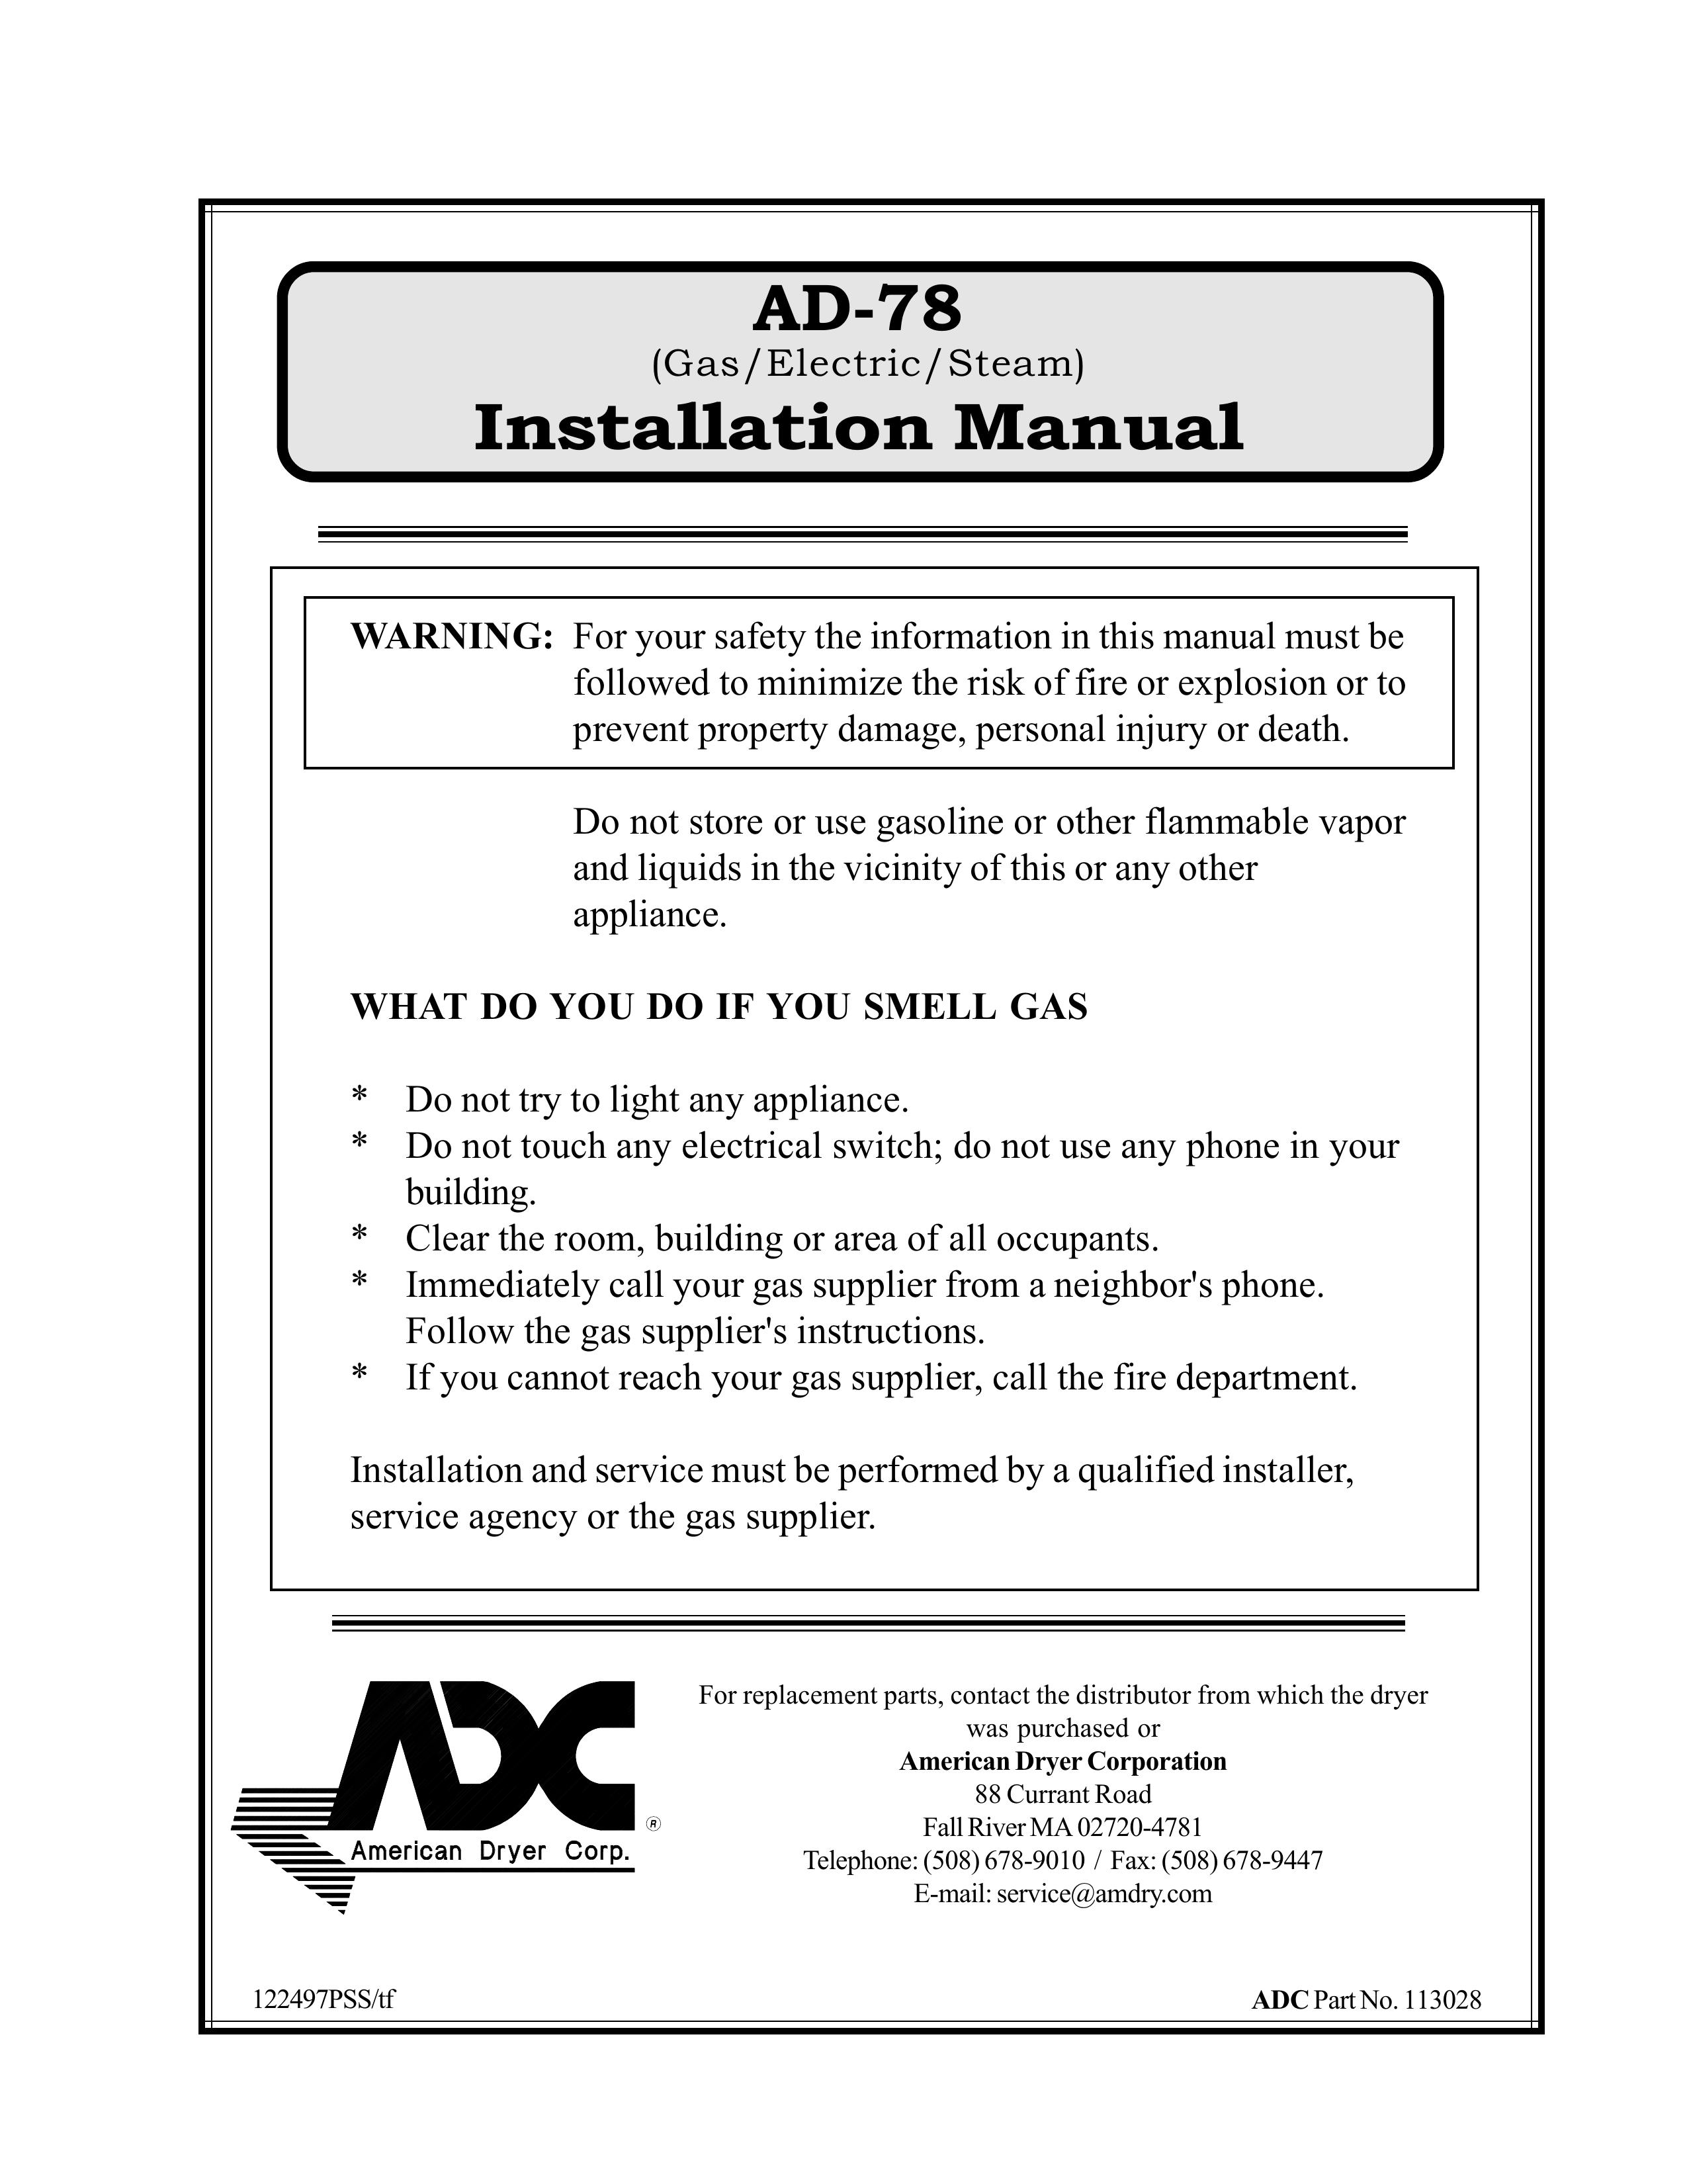 ADC AD-78 Clothes Dryer User Manual